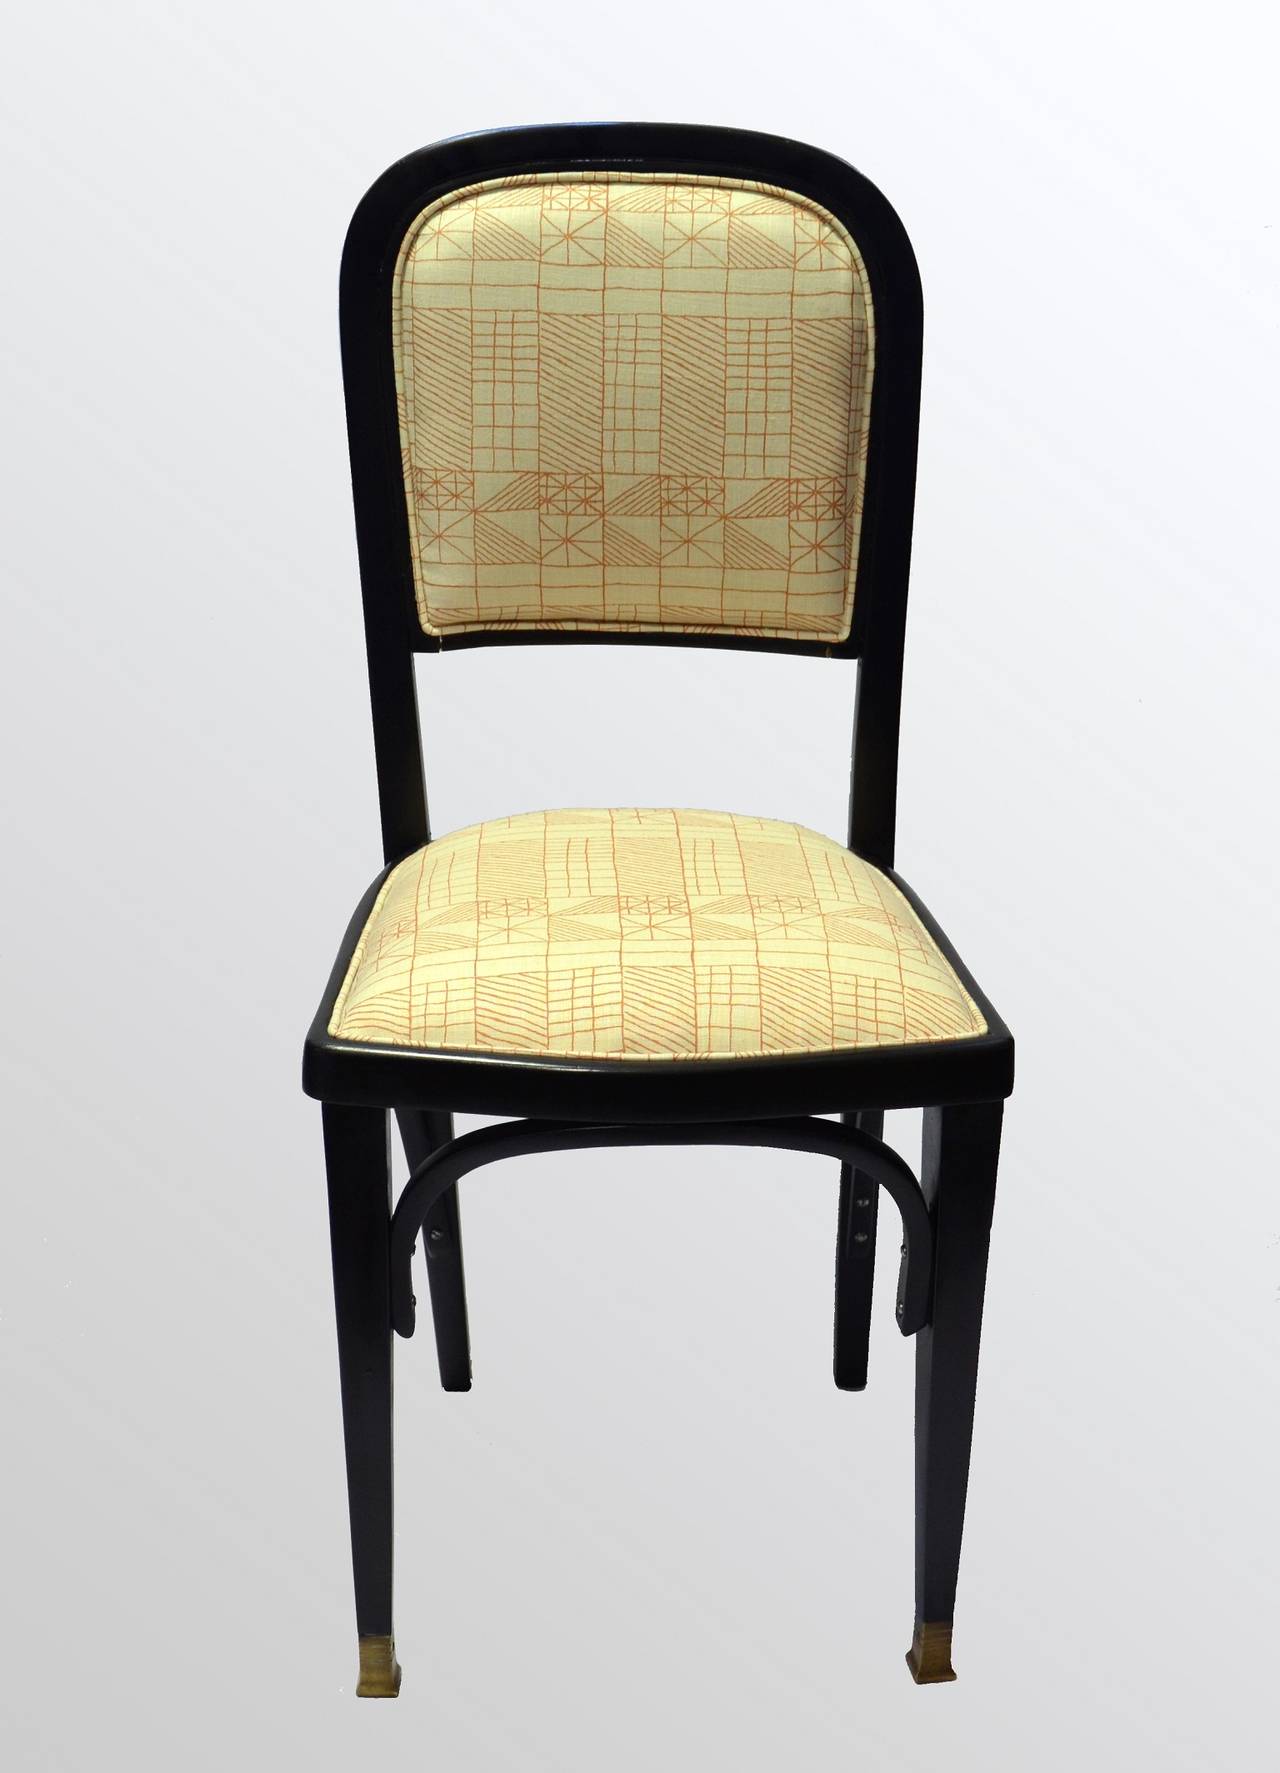 A pair Vienna Secession armchairs with brass feet in ebonised beech wood by Gustav Siegel, produced by J. & J. Kohn,

Upholstered in Kerry Joyce Linen and Velvet.  

Austrian, circa 1900 This chair was exhibited for the first time at the